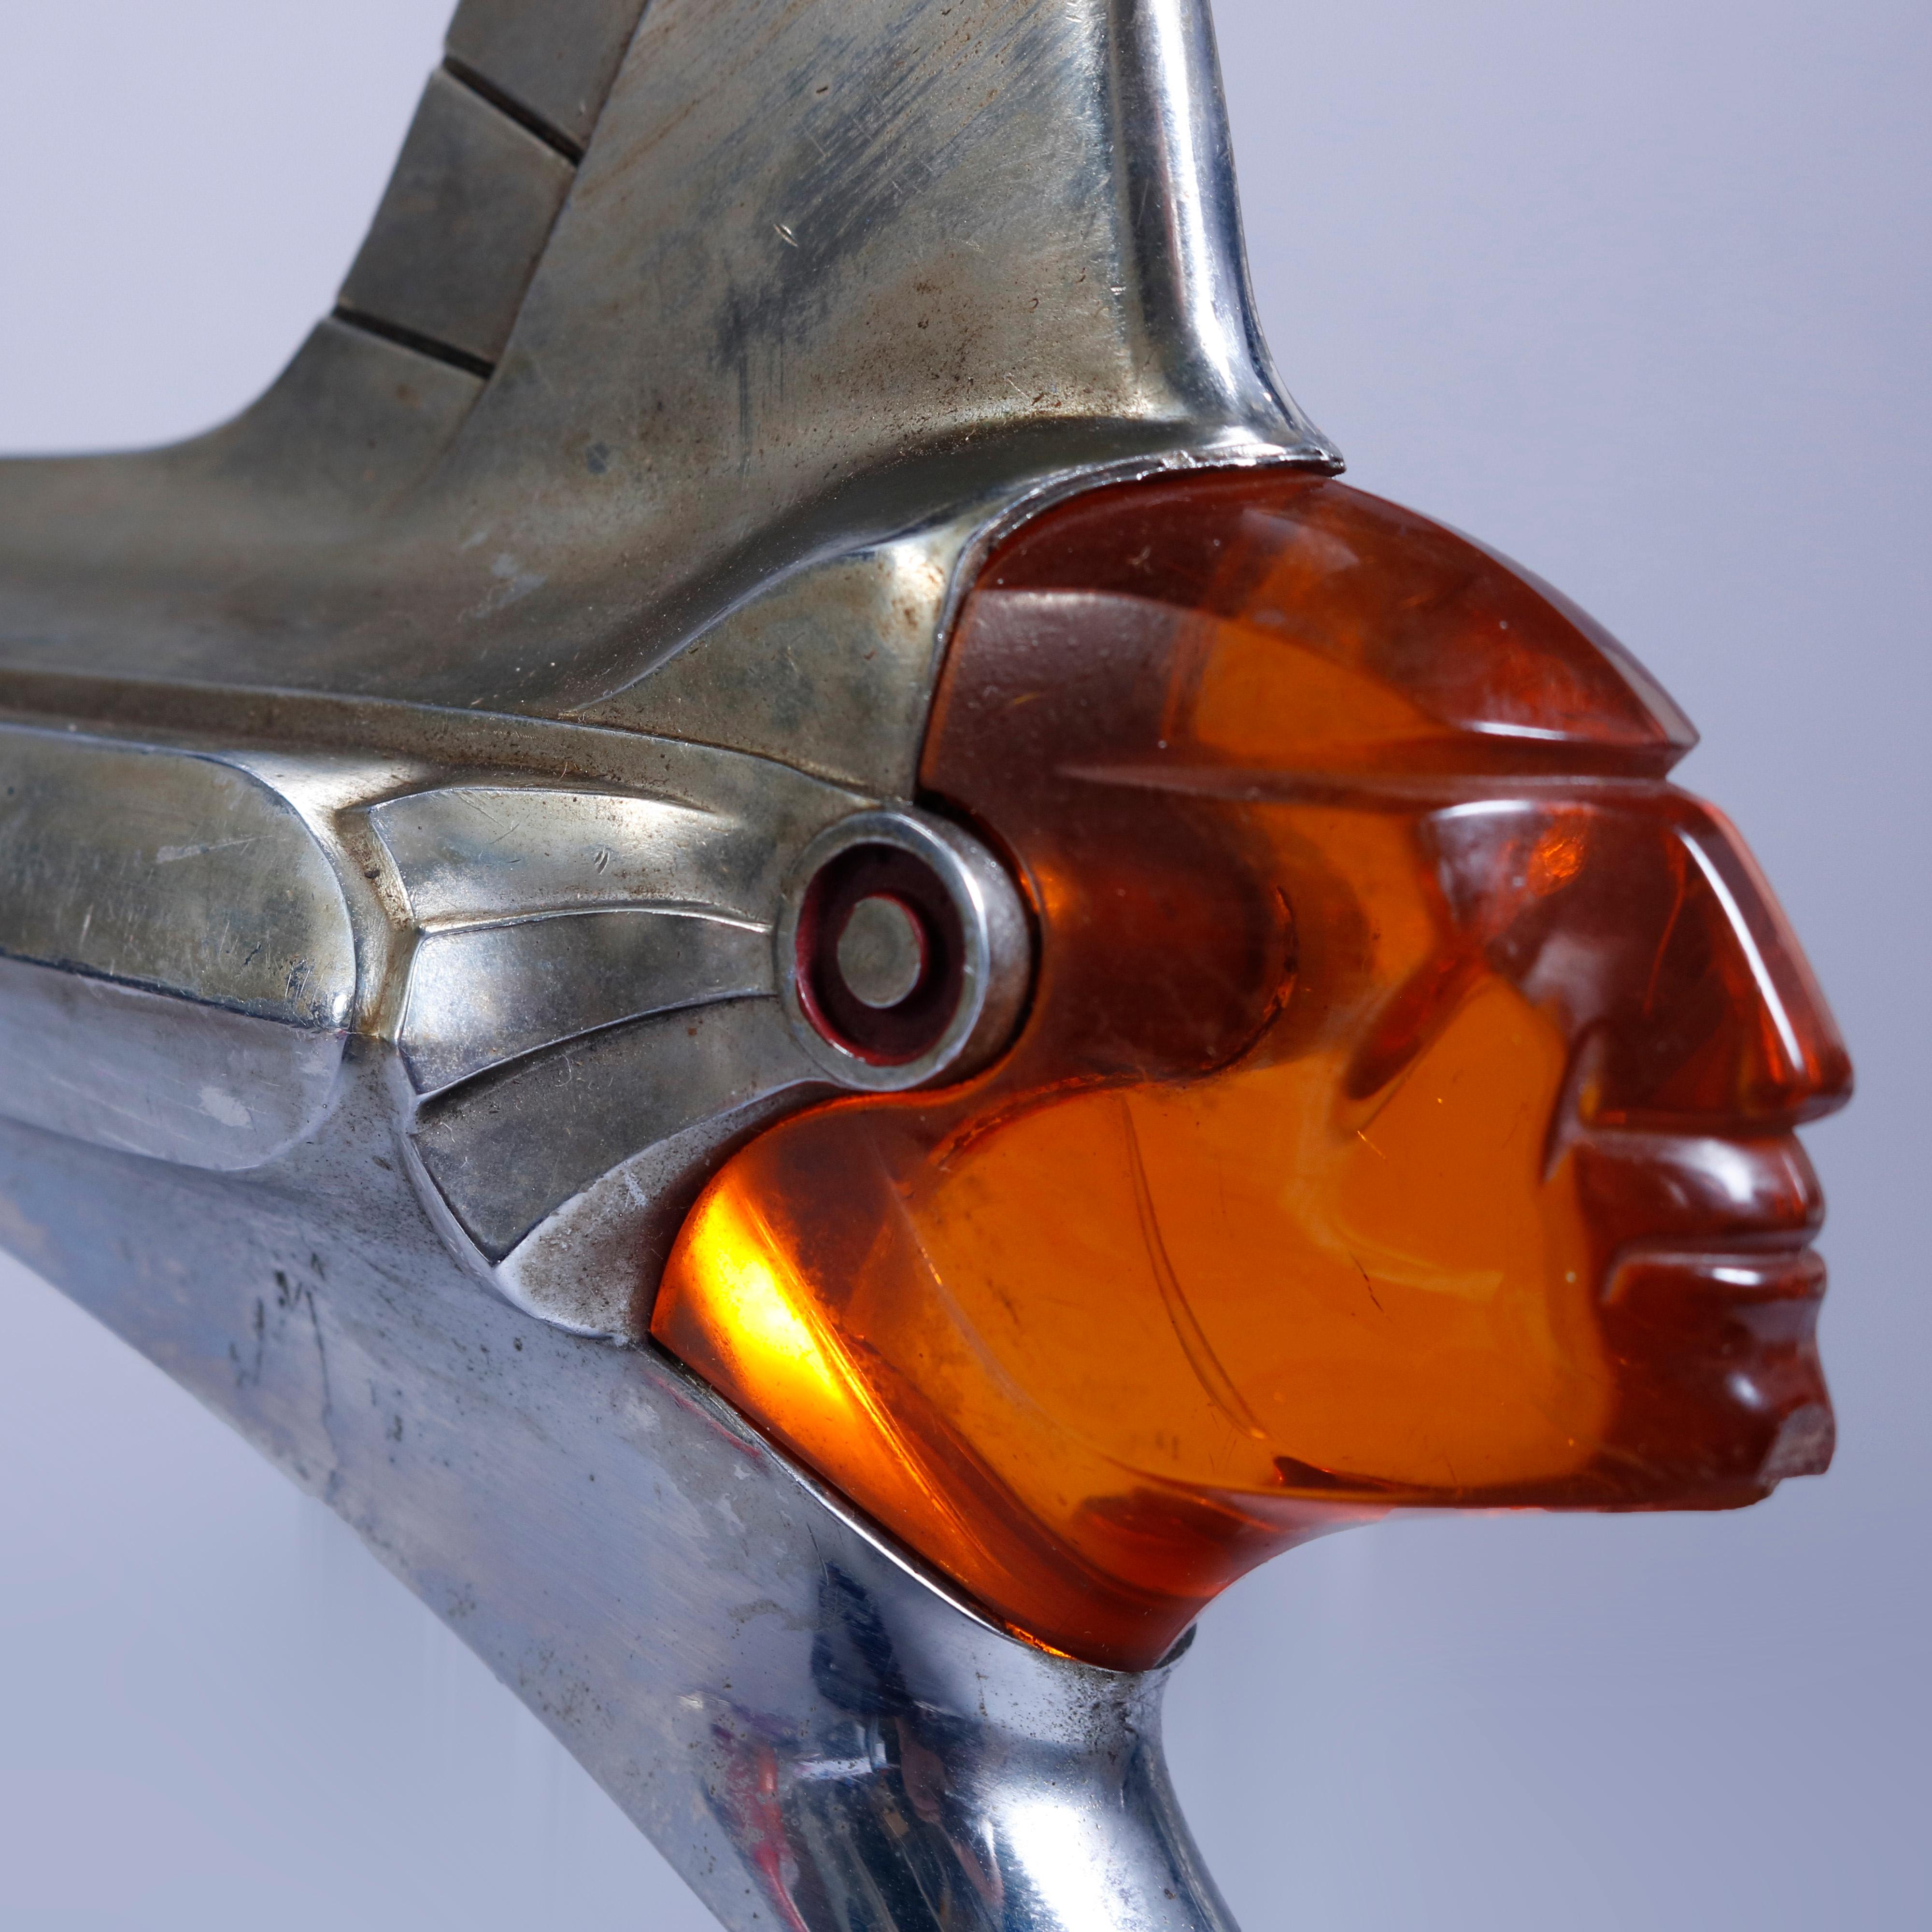 A vintage or retro Art Deco figural American Indian Chieftain 1951 Pontiac hot rod automobile hood ornament offers chrome frame with amber resin profile, circa 1951

***DELIVERY NOTICE – Due to COVID-19 we are employing NO-CONTACT PRACTICES in the